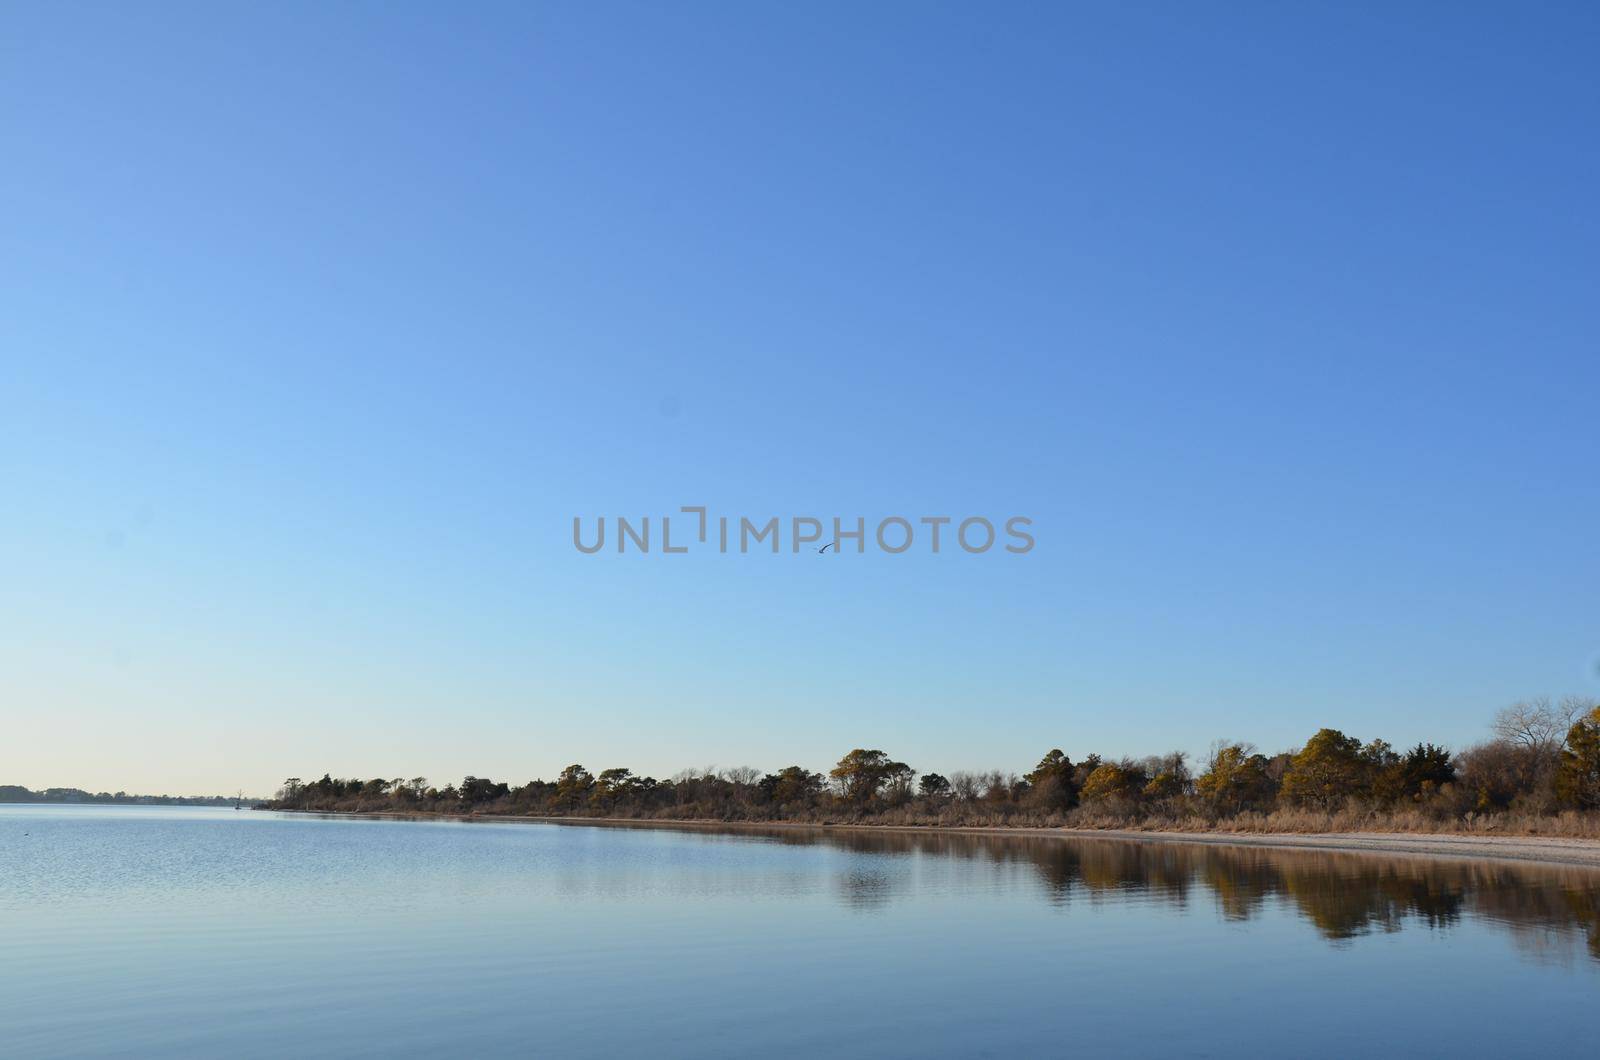 a lake or river with brown grasses and shore and bird by stockphotofan1